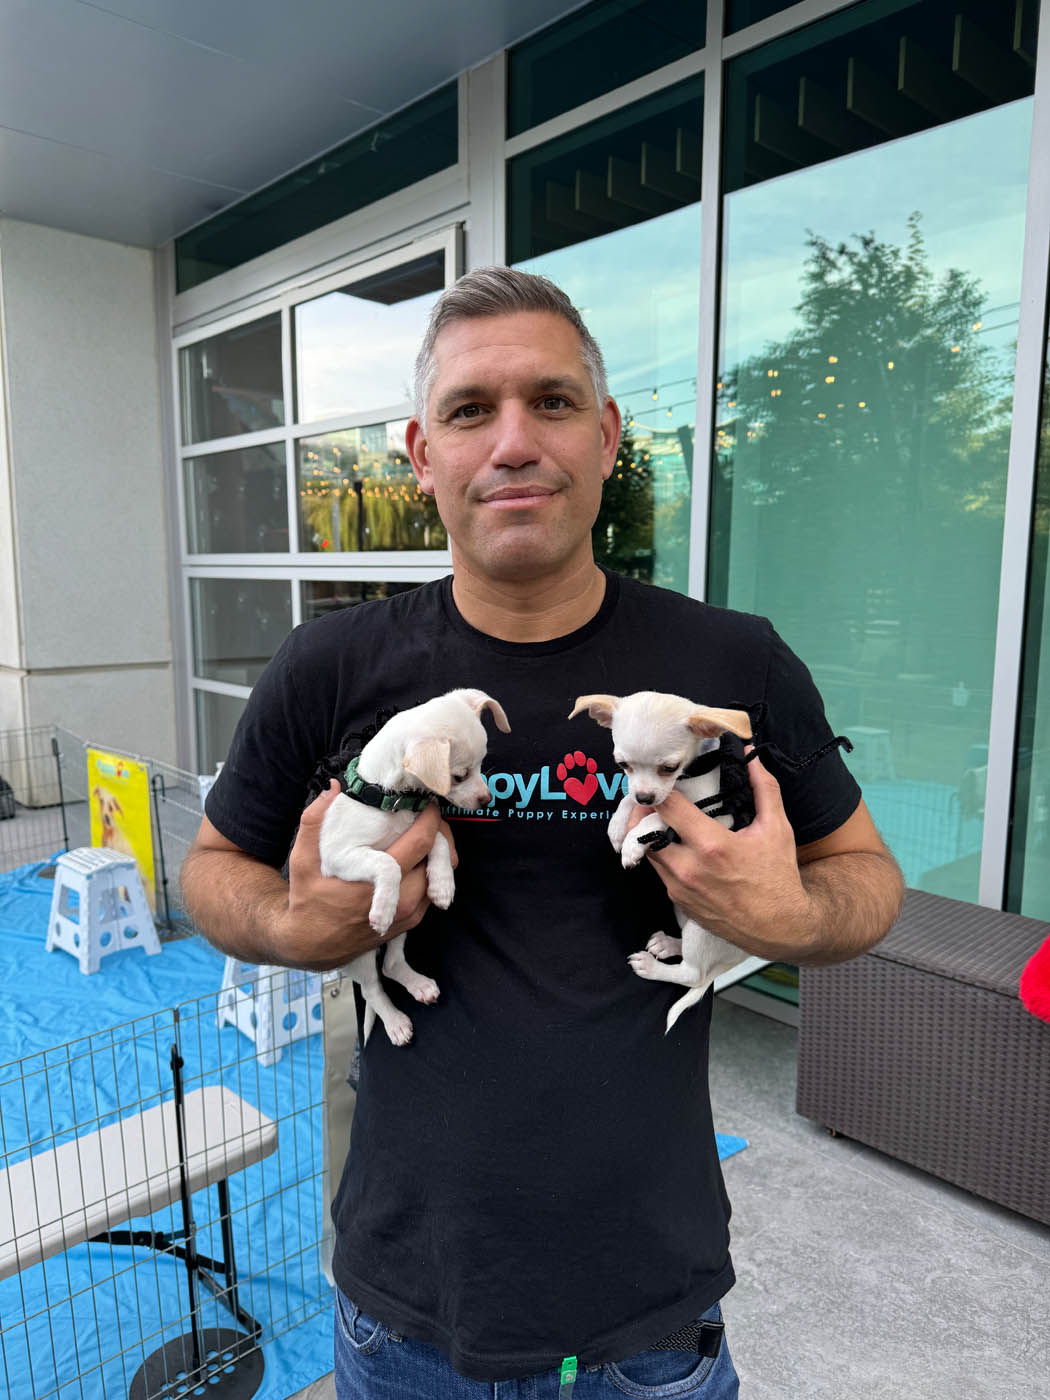 Man in Puppy Love shirt holding two adorable puppies in customes at google's halloween celebration event!